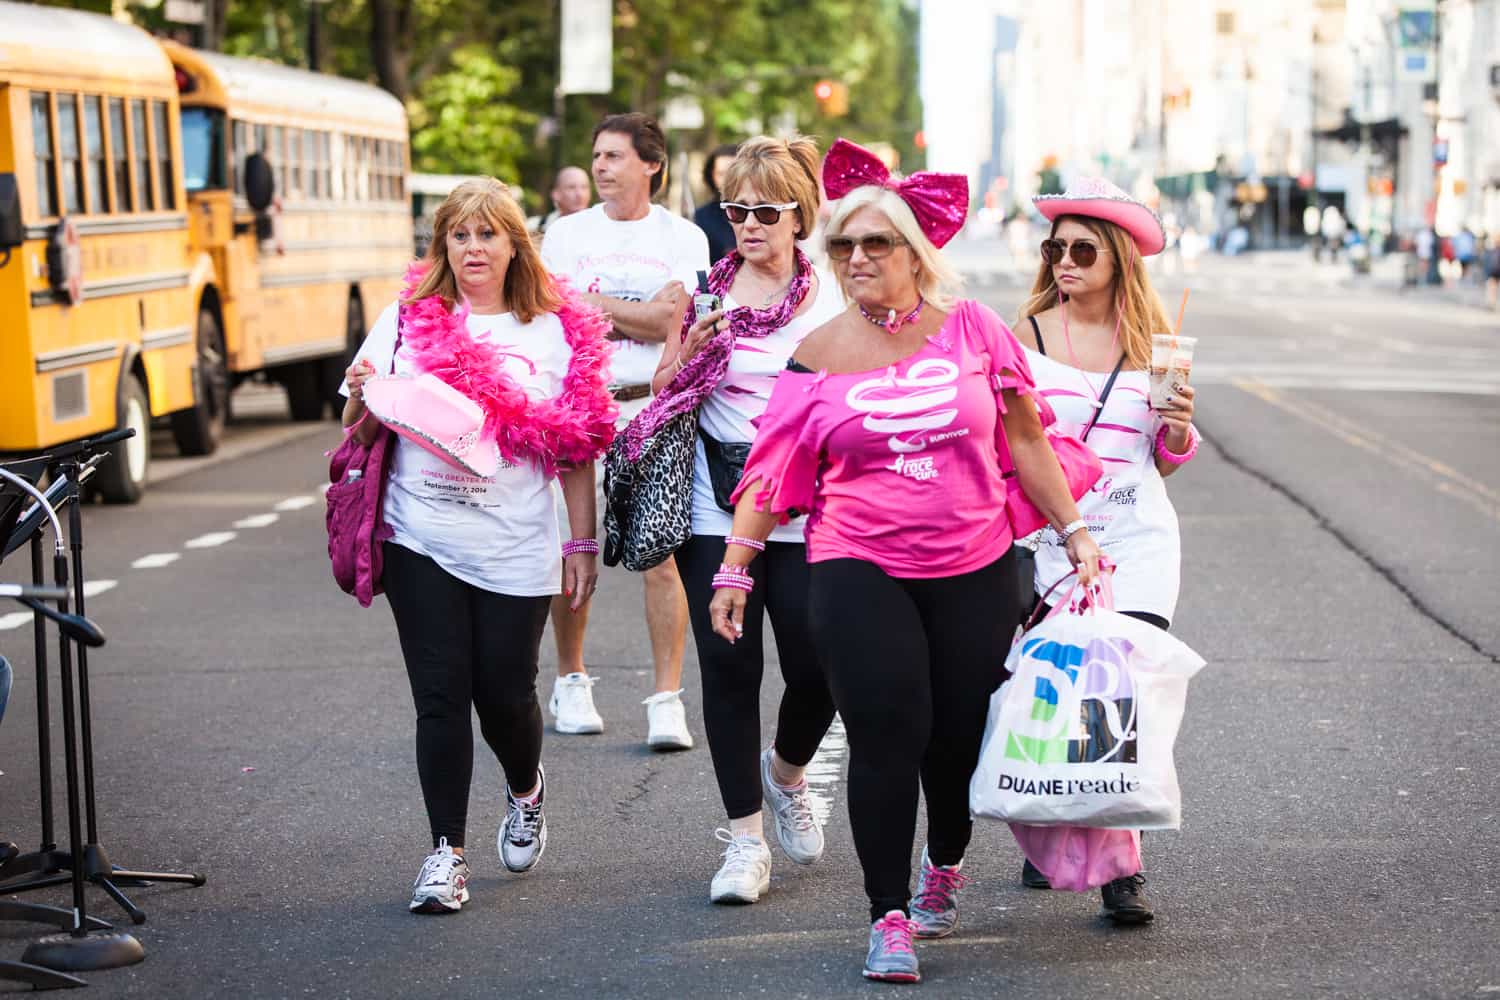 NYC Race for the Cure photos of group of supporters wearing pink outfits